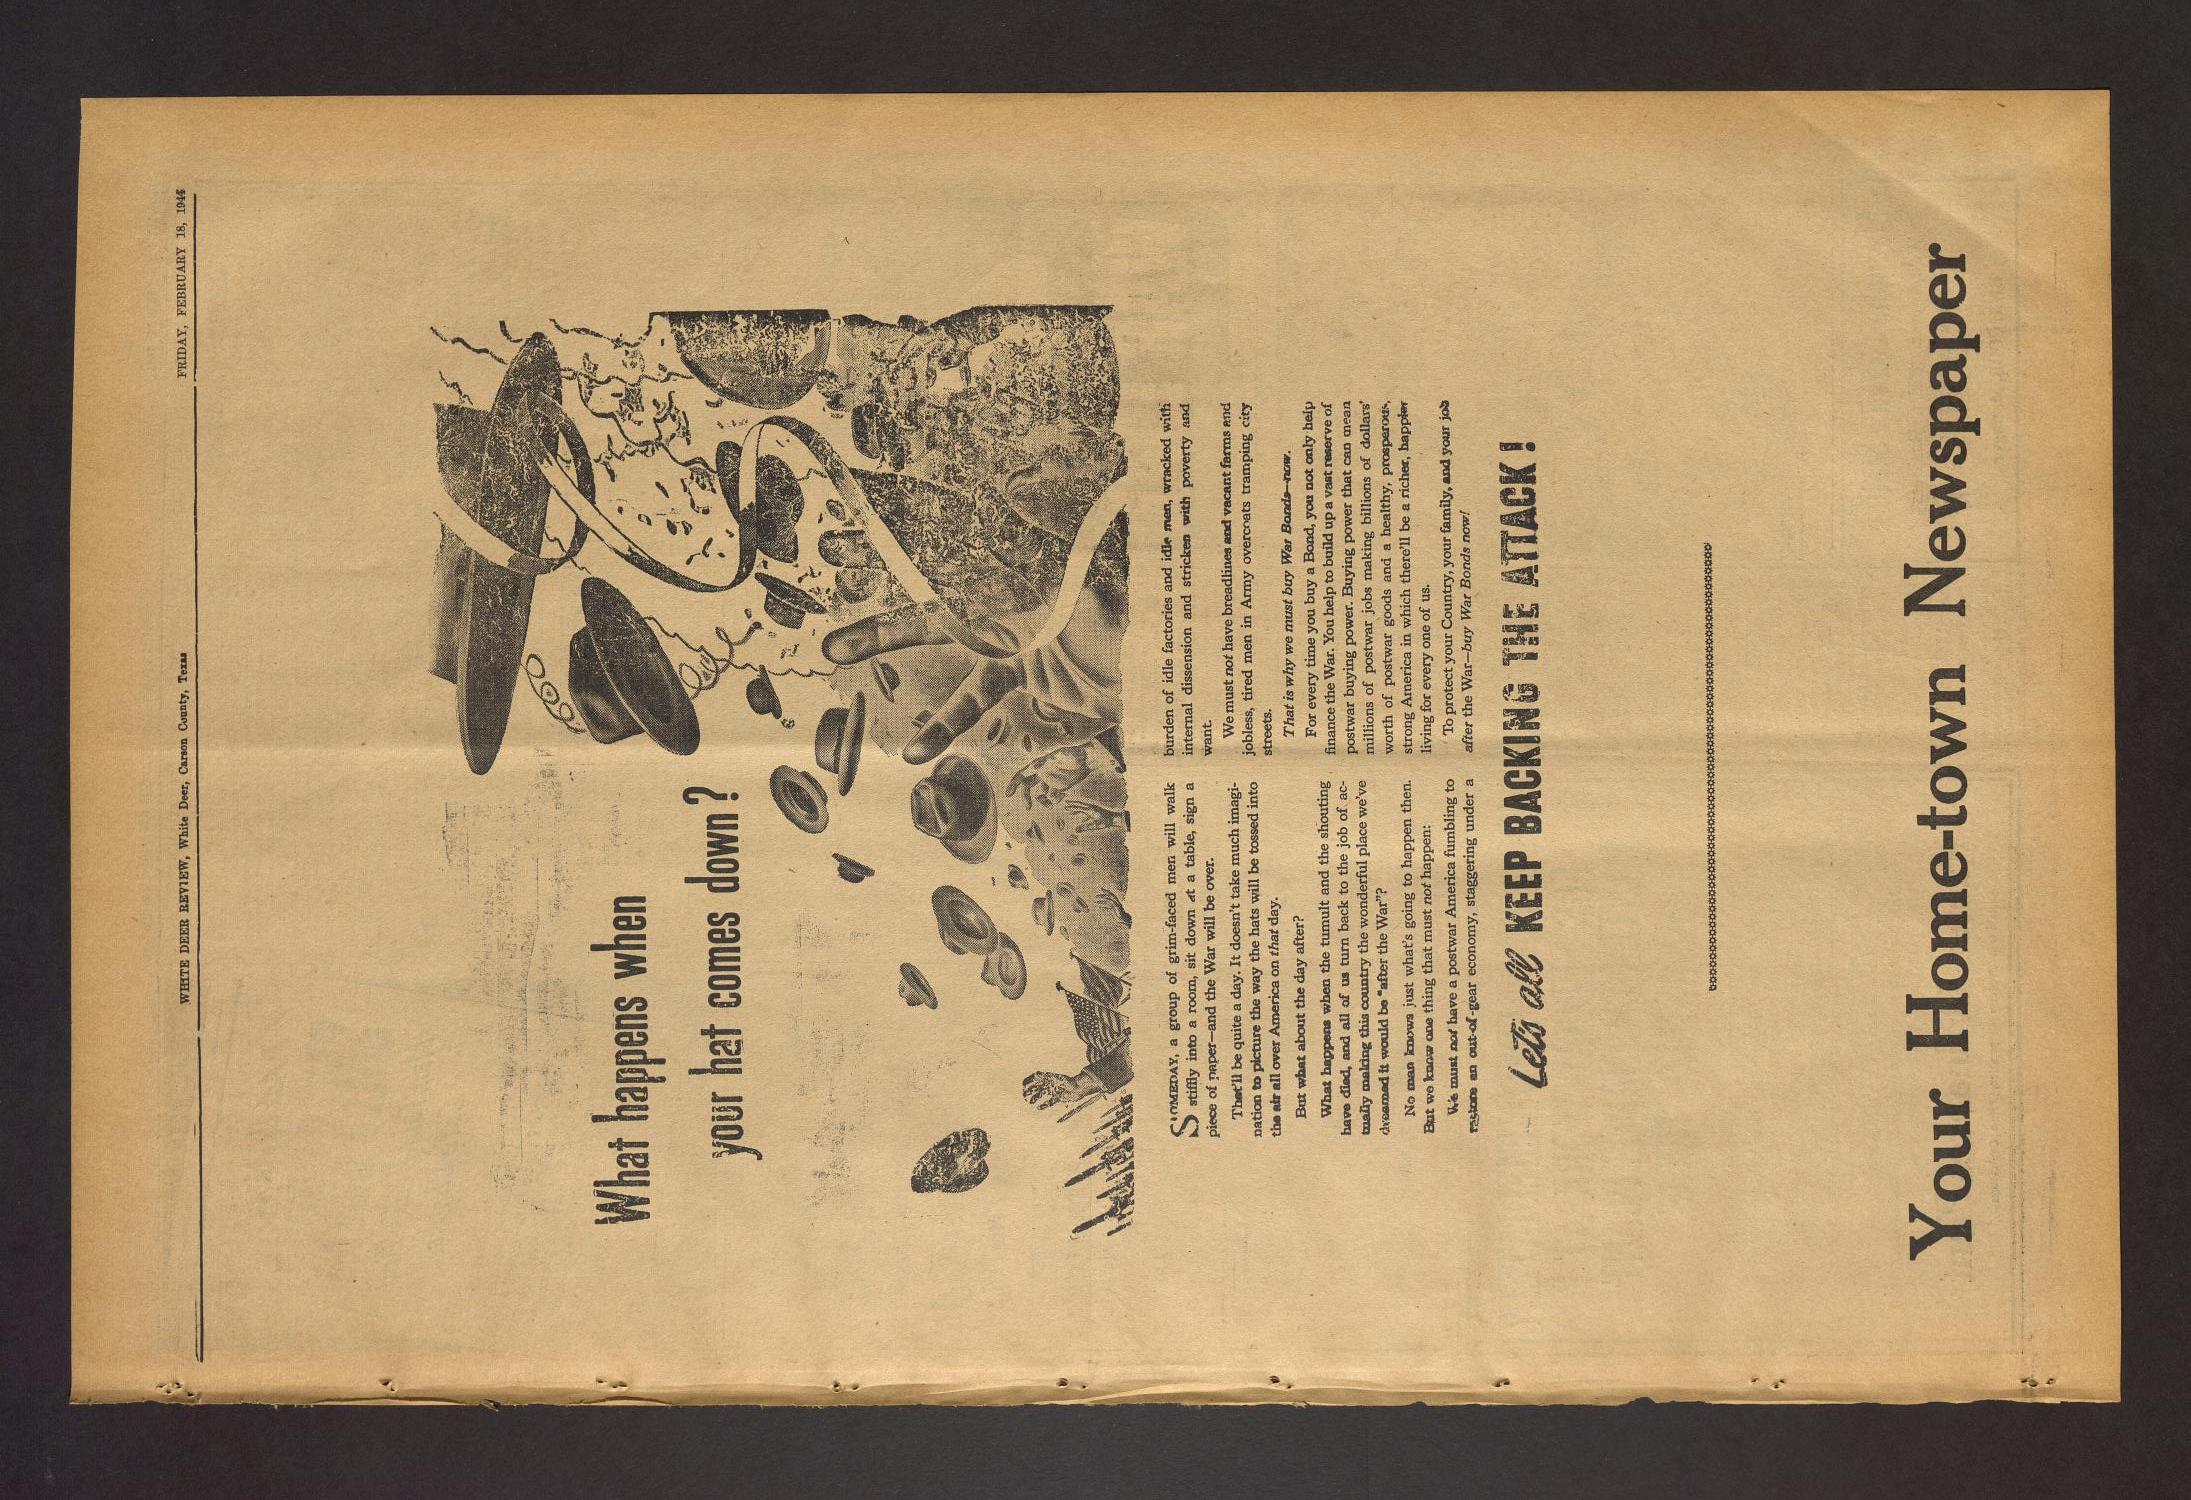 White Deer Review (White Deer, Tex.), Vol. 20, No. 48, Ed. 1 Friday, February 18, 1944
                                                
                                                    [Sequence #]: 3 of 4
                                                